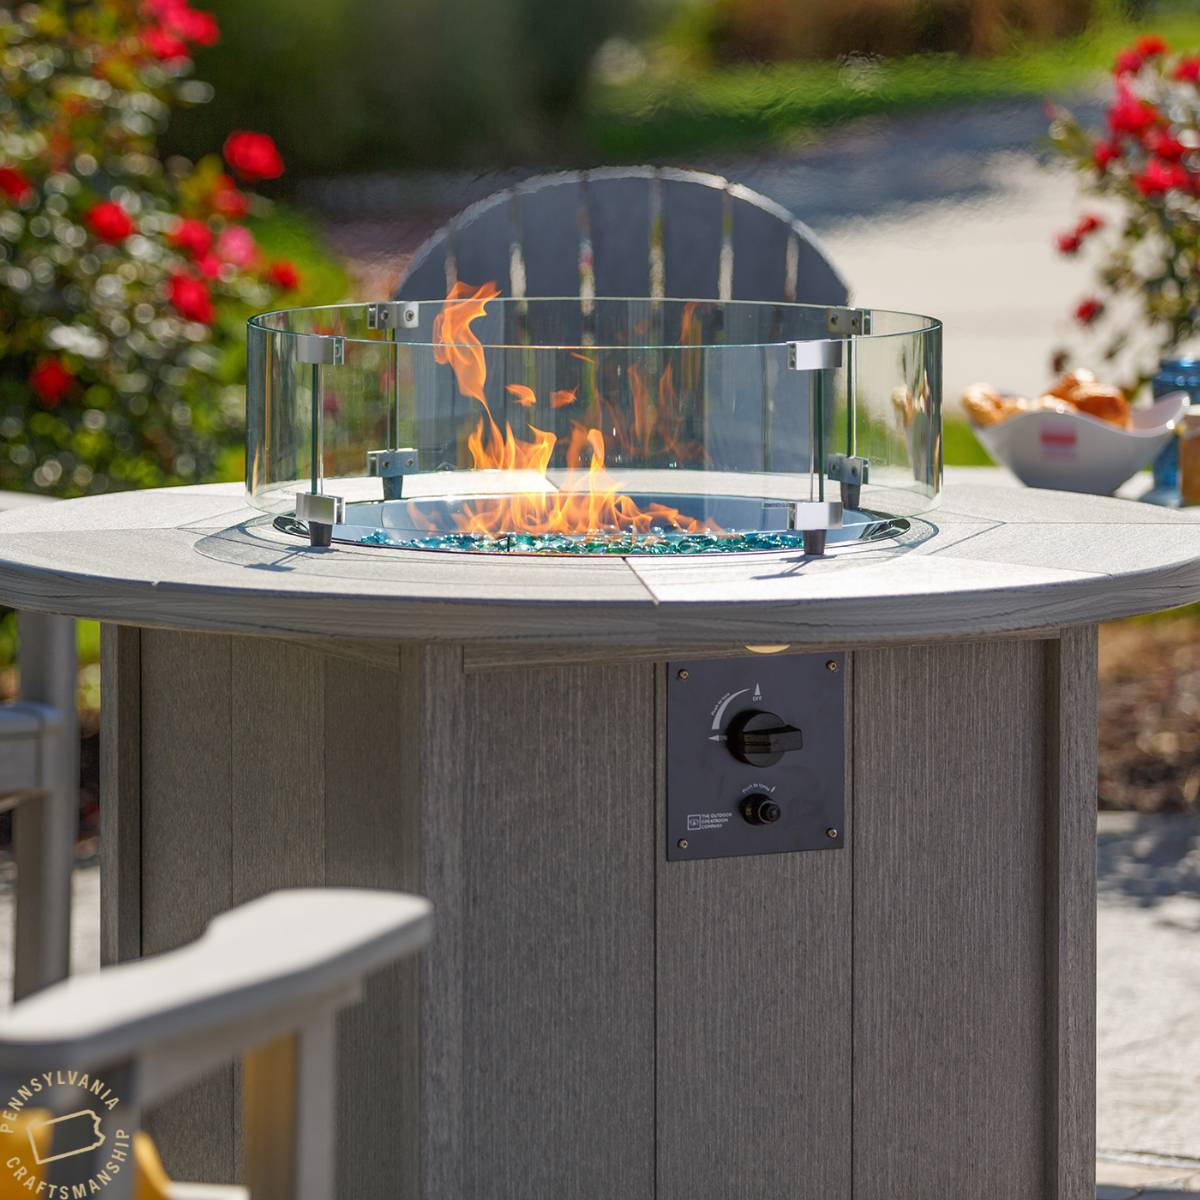 SeaAira 42" Round Fire Pit - snyders.furniture